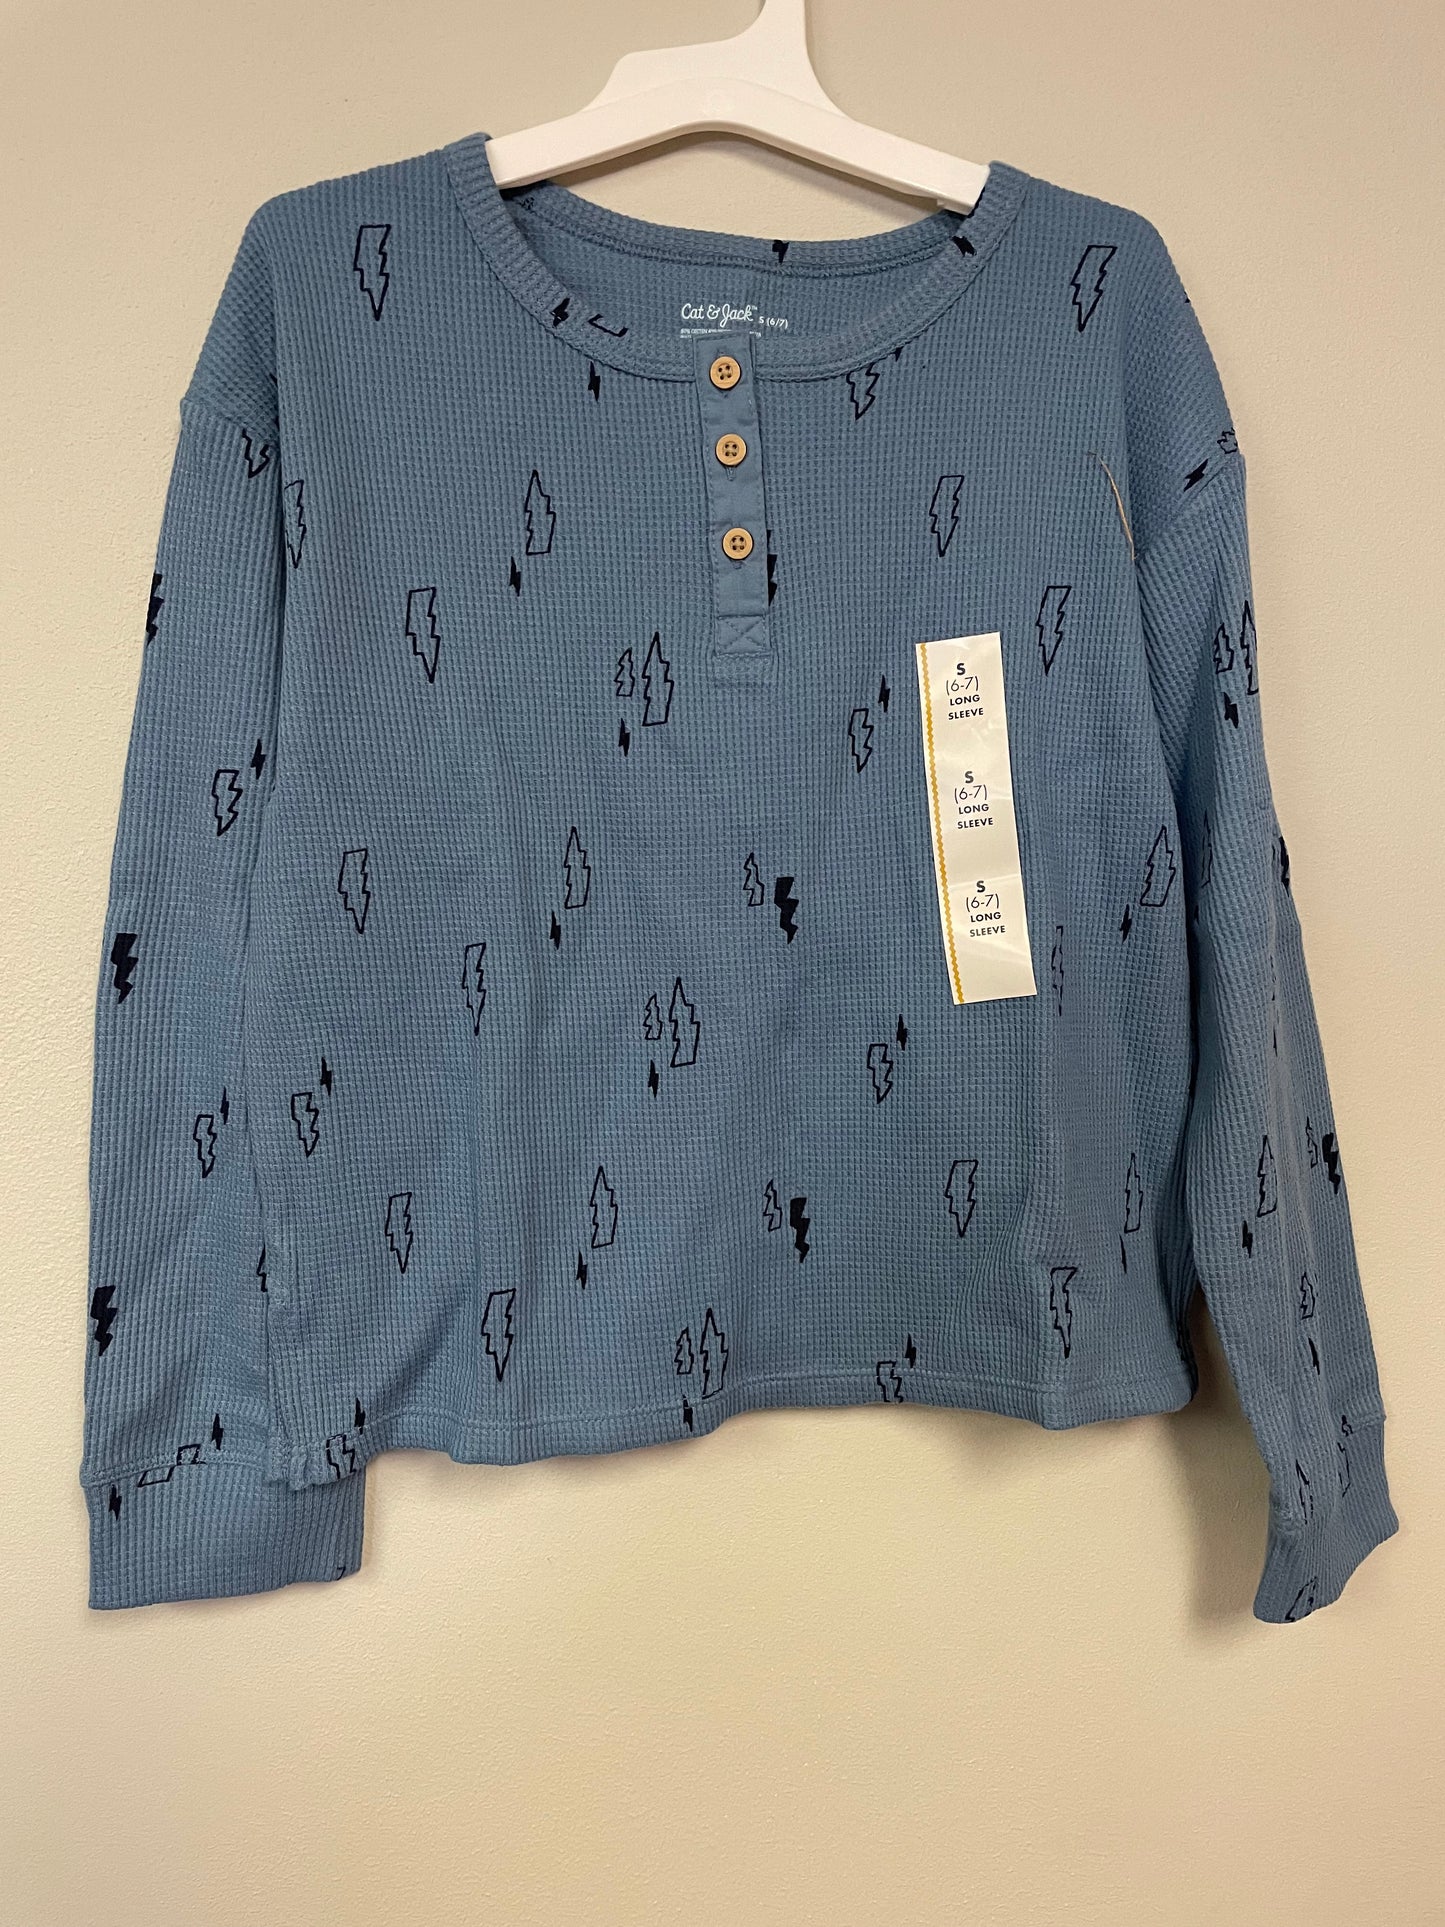 New Boy small 6-7 cat and jack long sleeve shirt